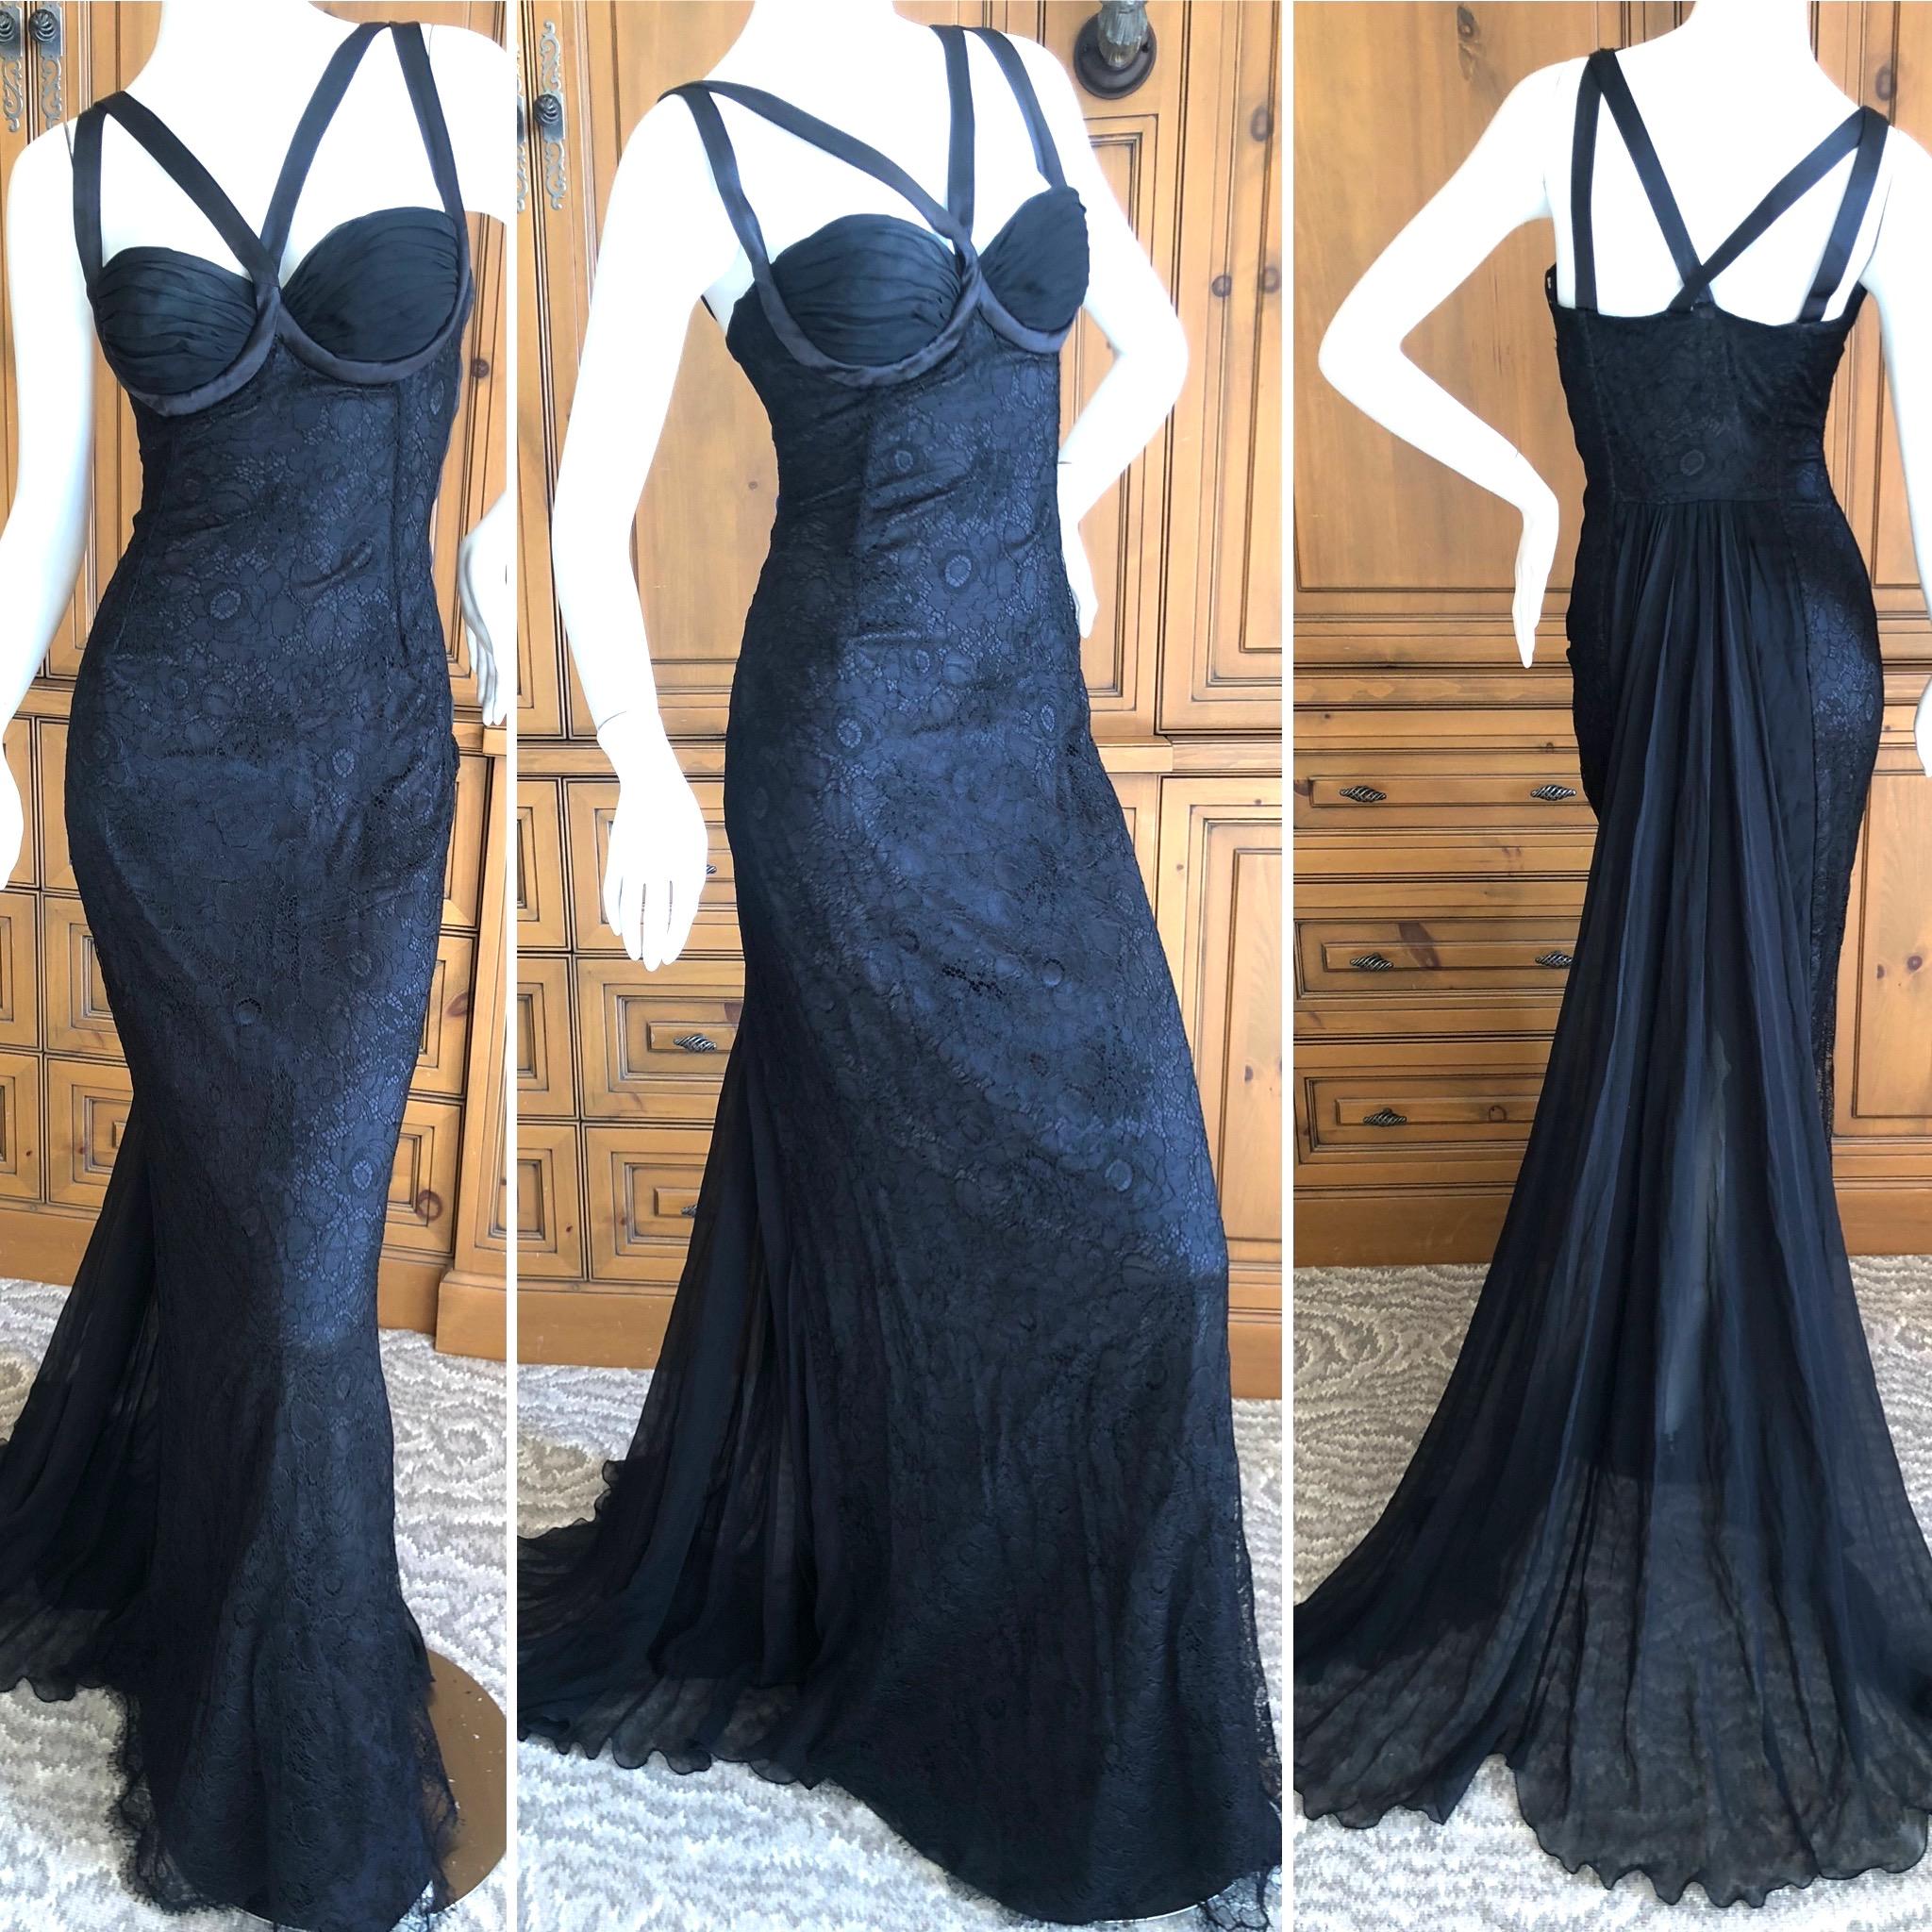 Dolce & Gabbana Vintage Black Lace Corset Evening Gown with Train.
This is so wonderful, so sexy. the photos don't do it justice.
Size 42
 Bust 36